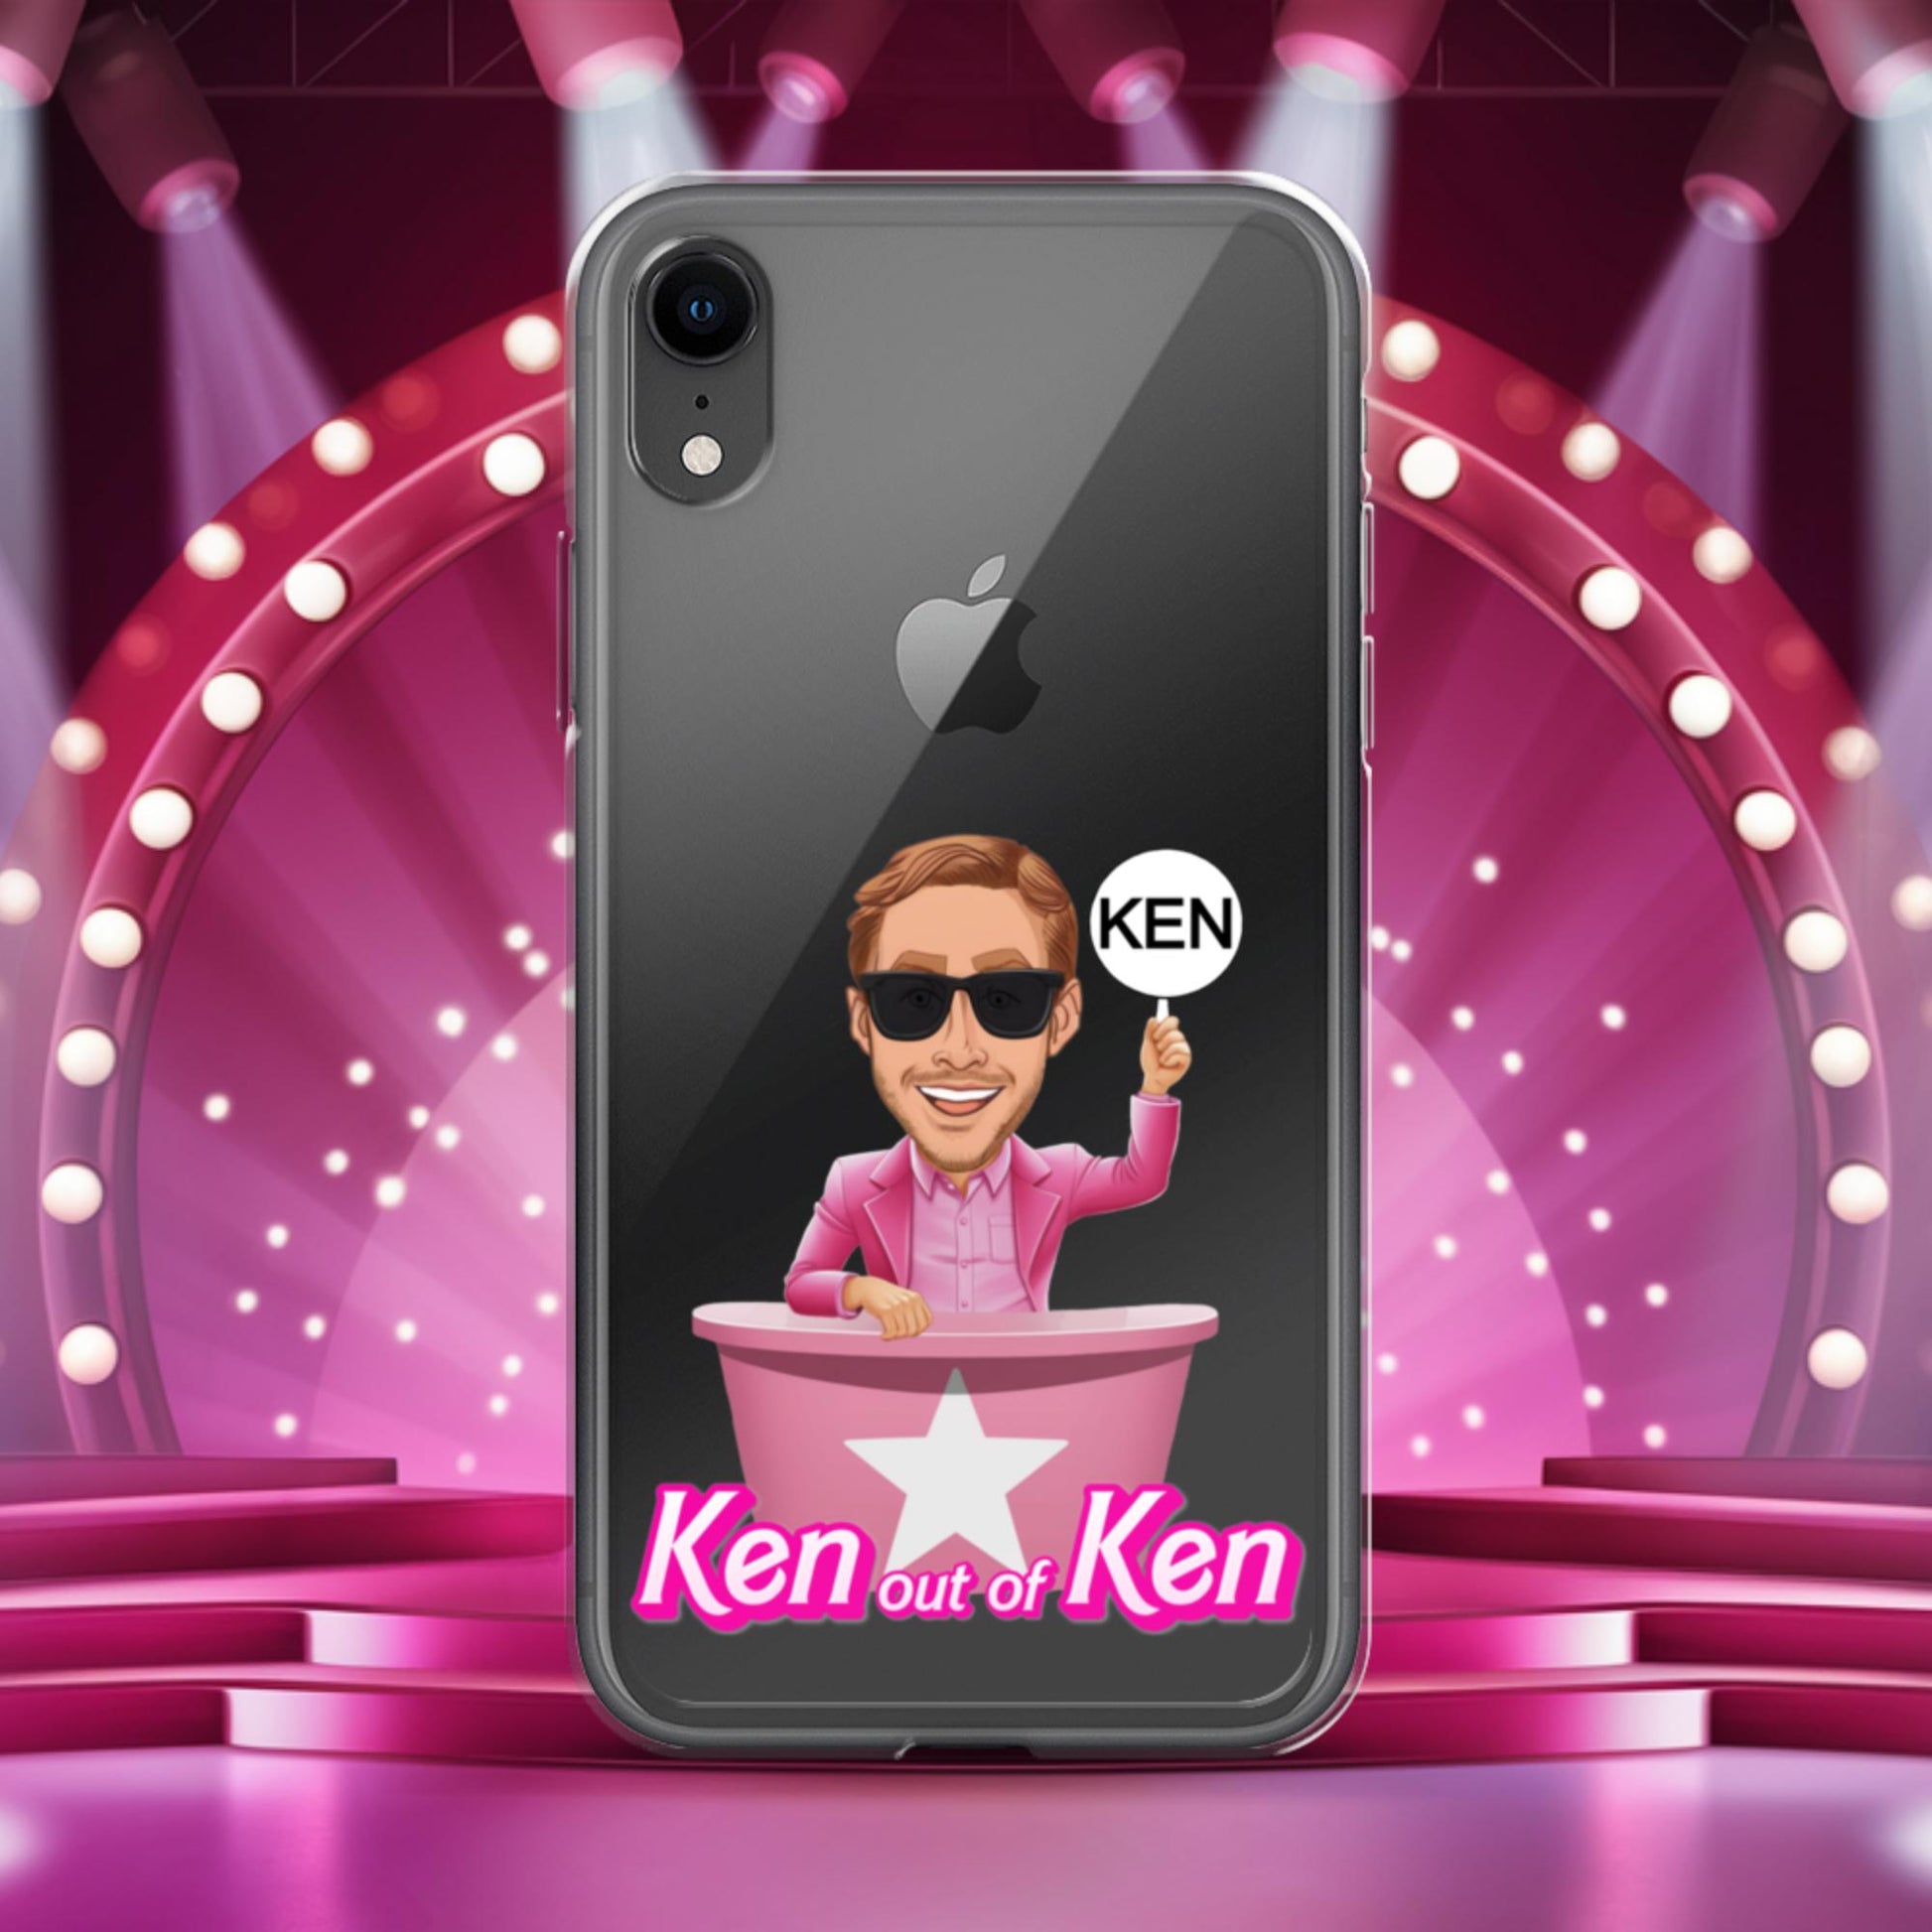 Ken out of Ken Ryan Gosling Barbie Movie Clear Case for iPhone Next Cult Brand